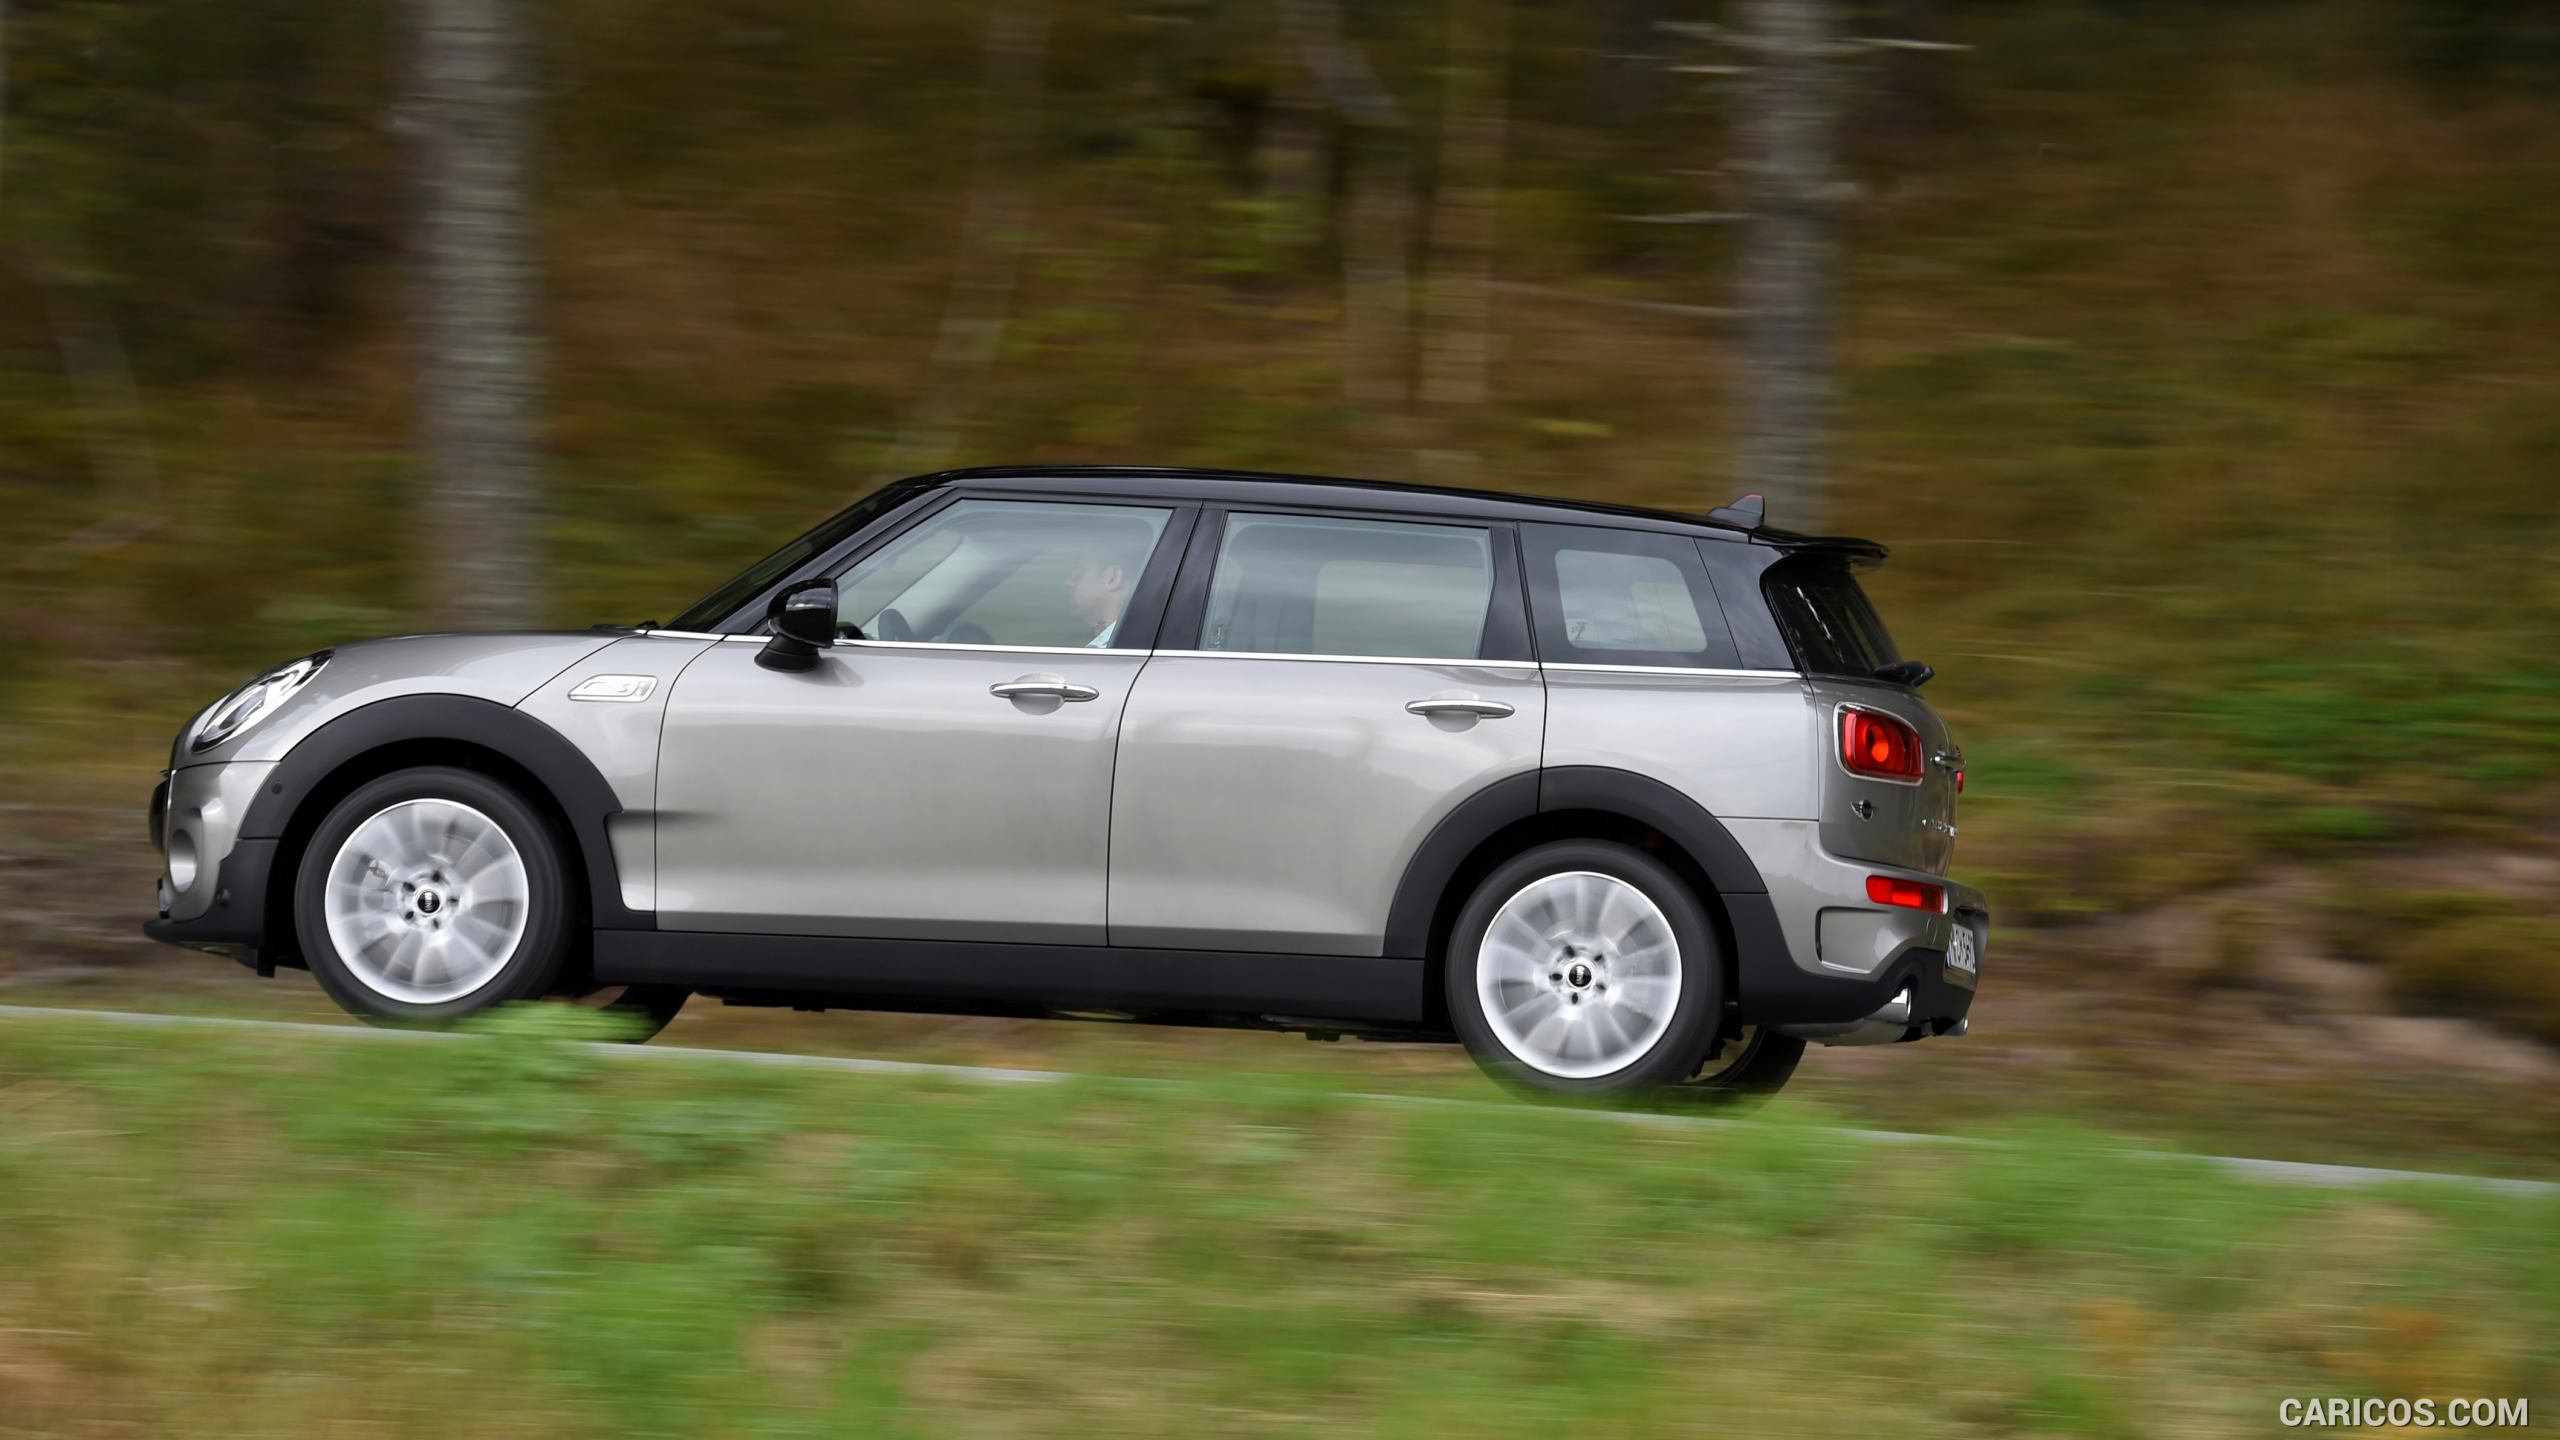 2016 MINI Cooper S Clubman in Metallic Melting Silver - Side, #153 of 380